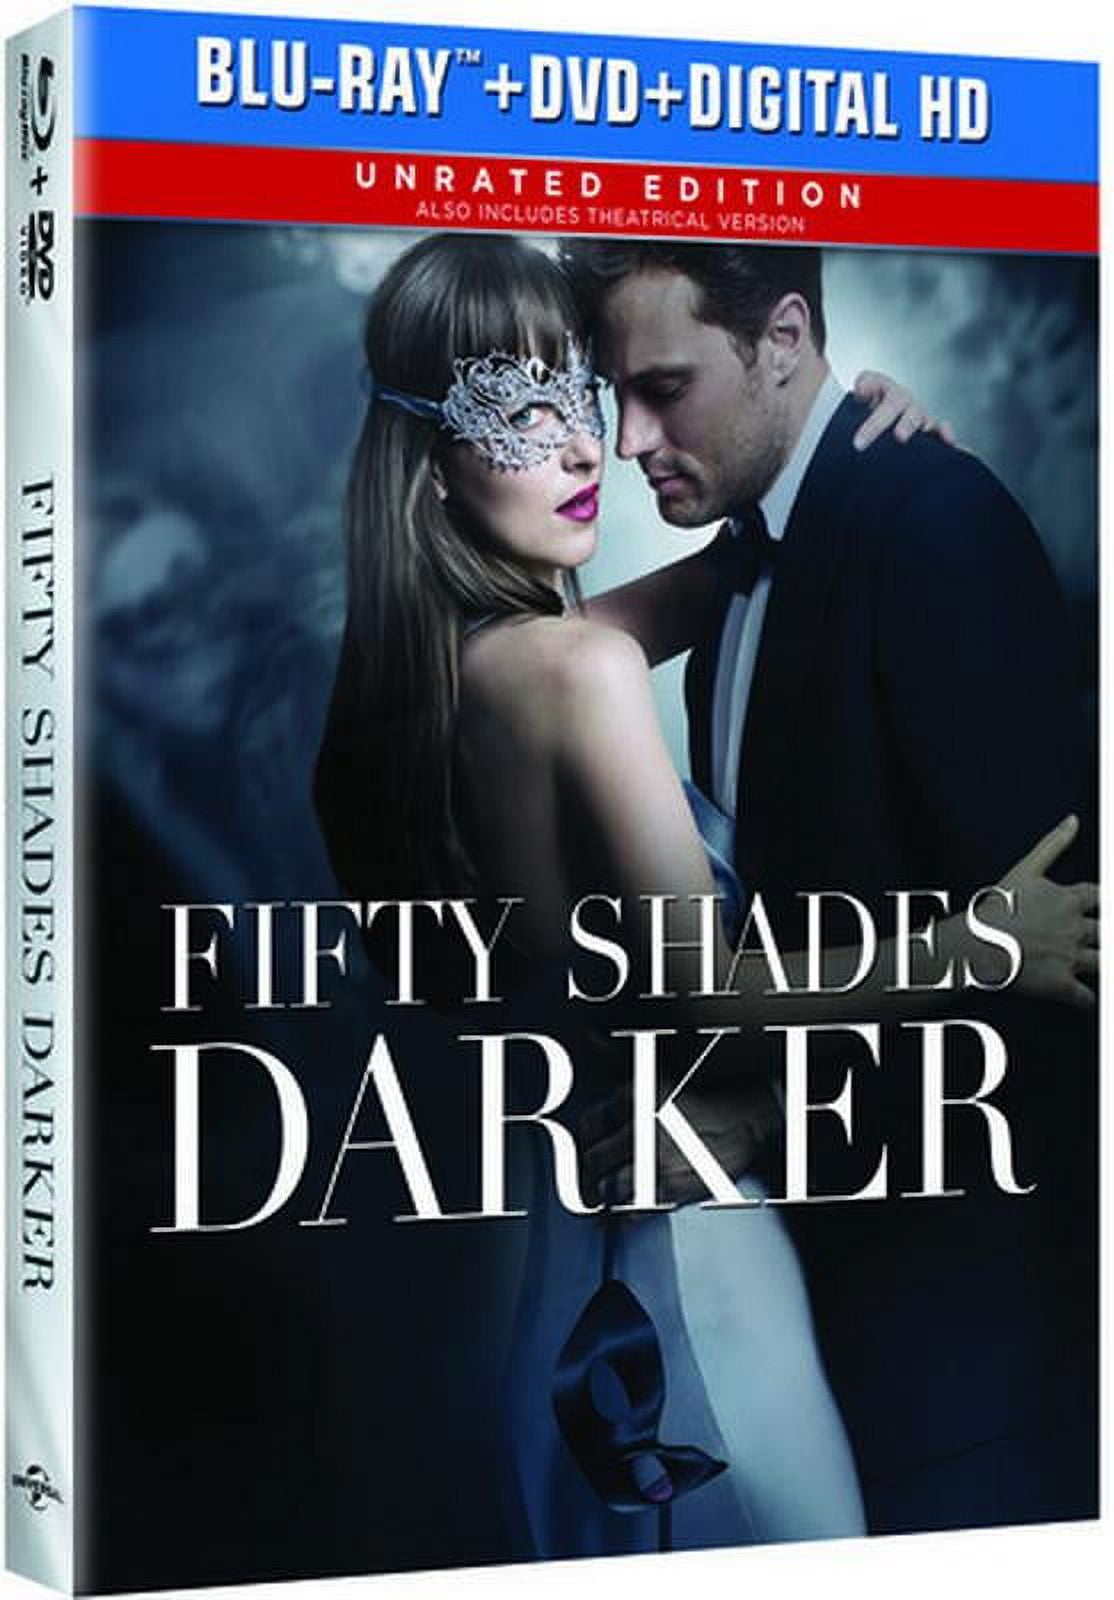 corey pigg recommends Fifty Shades Darker Uncensored Full Movie